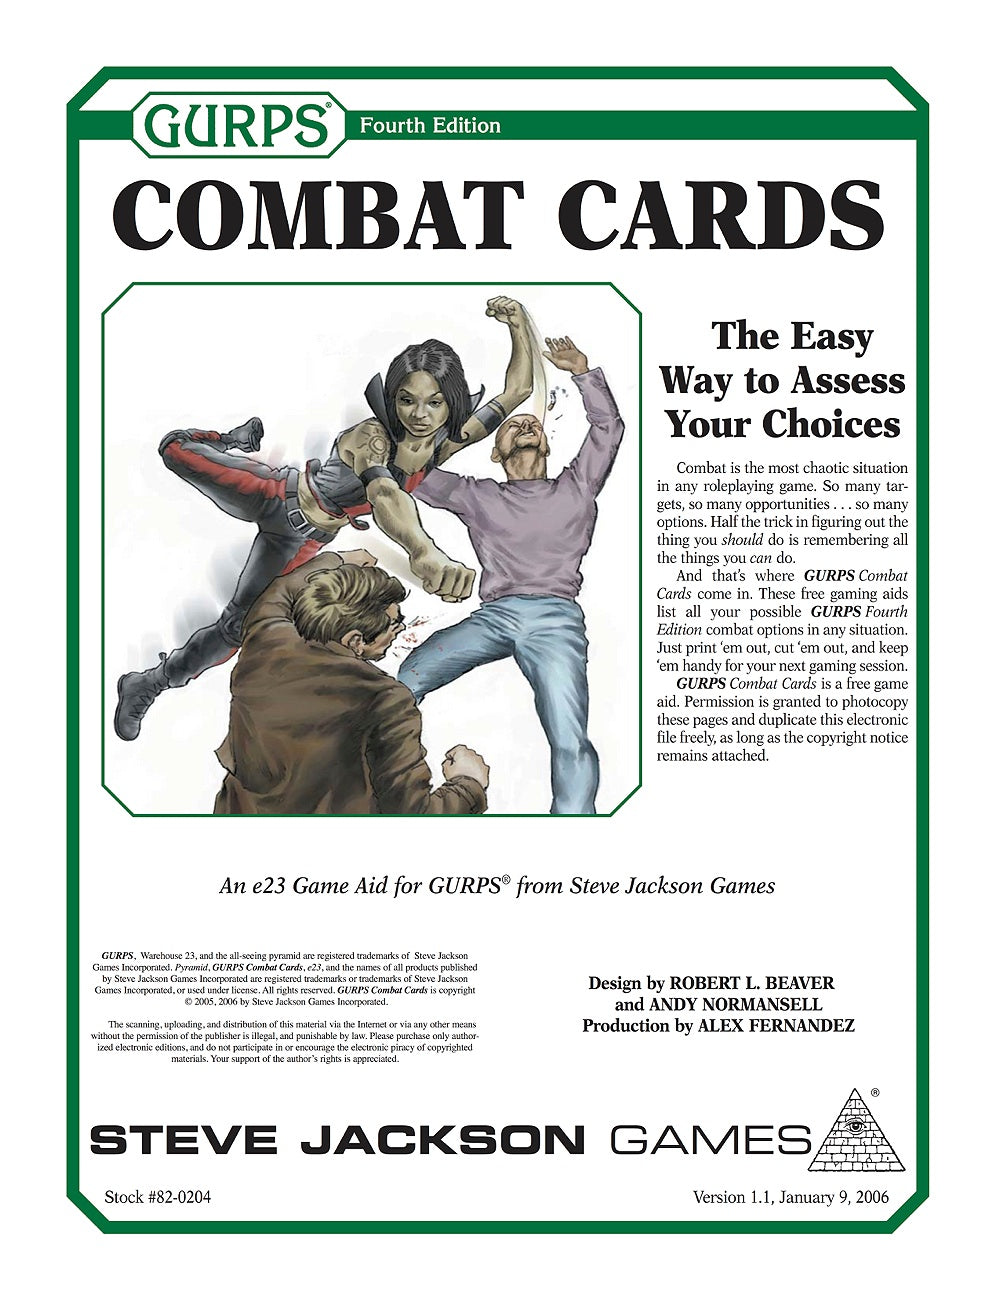 GURPS Fourth Edition Combat Cards